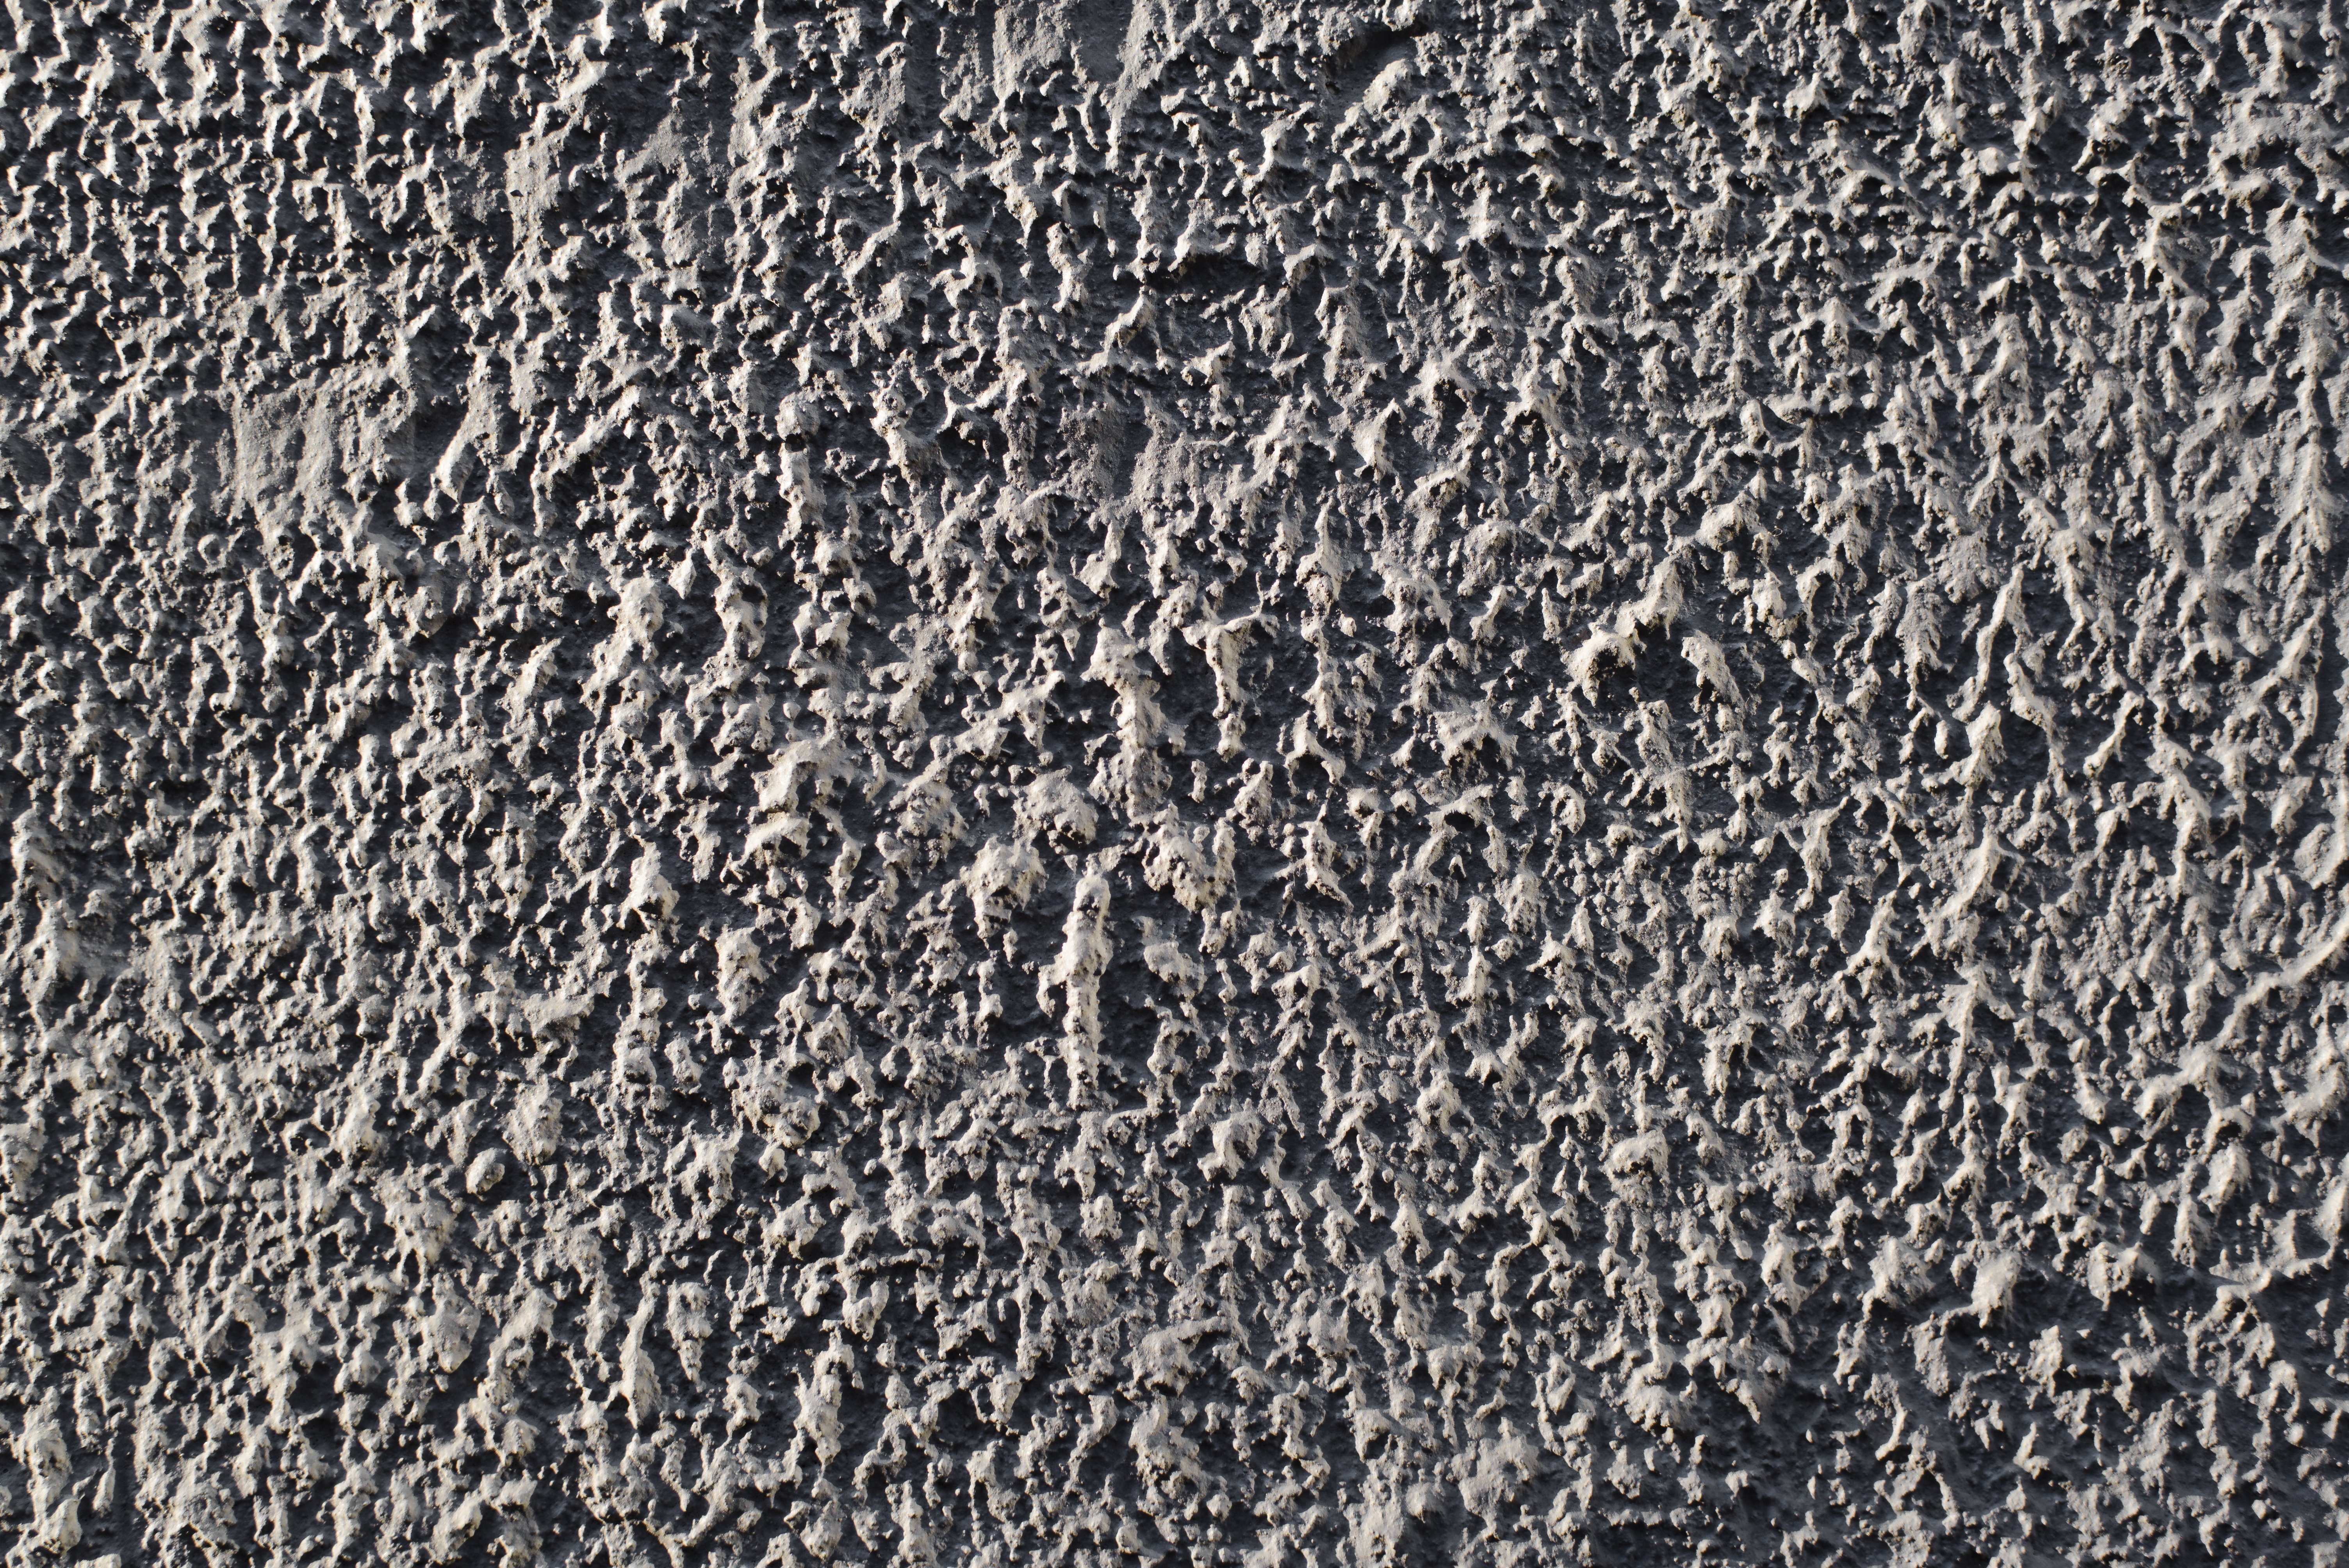 How to Roughen a Concrete Surface